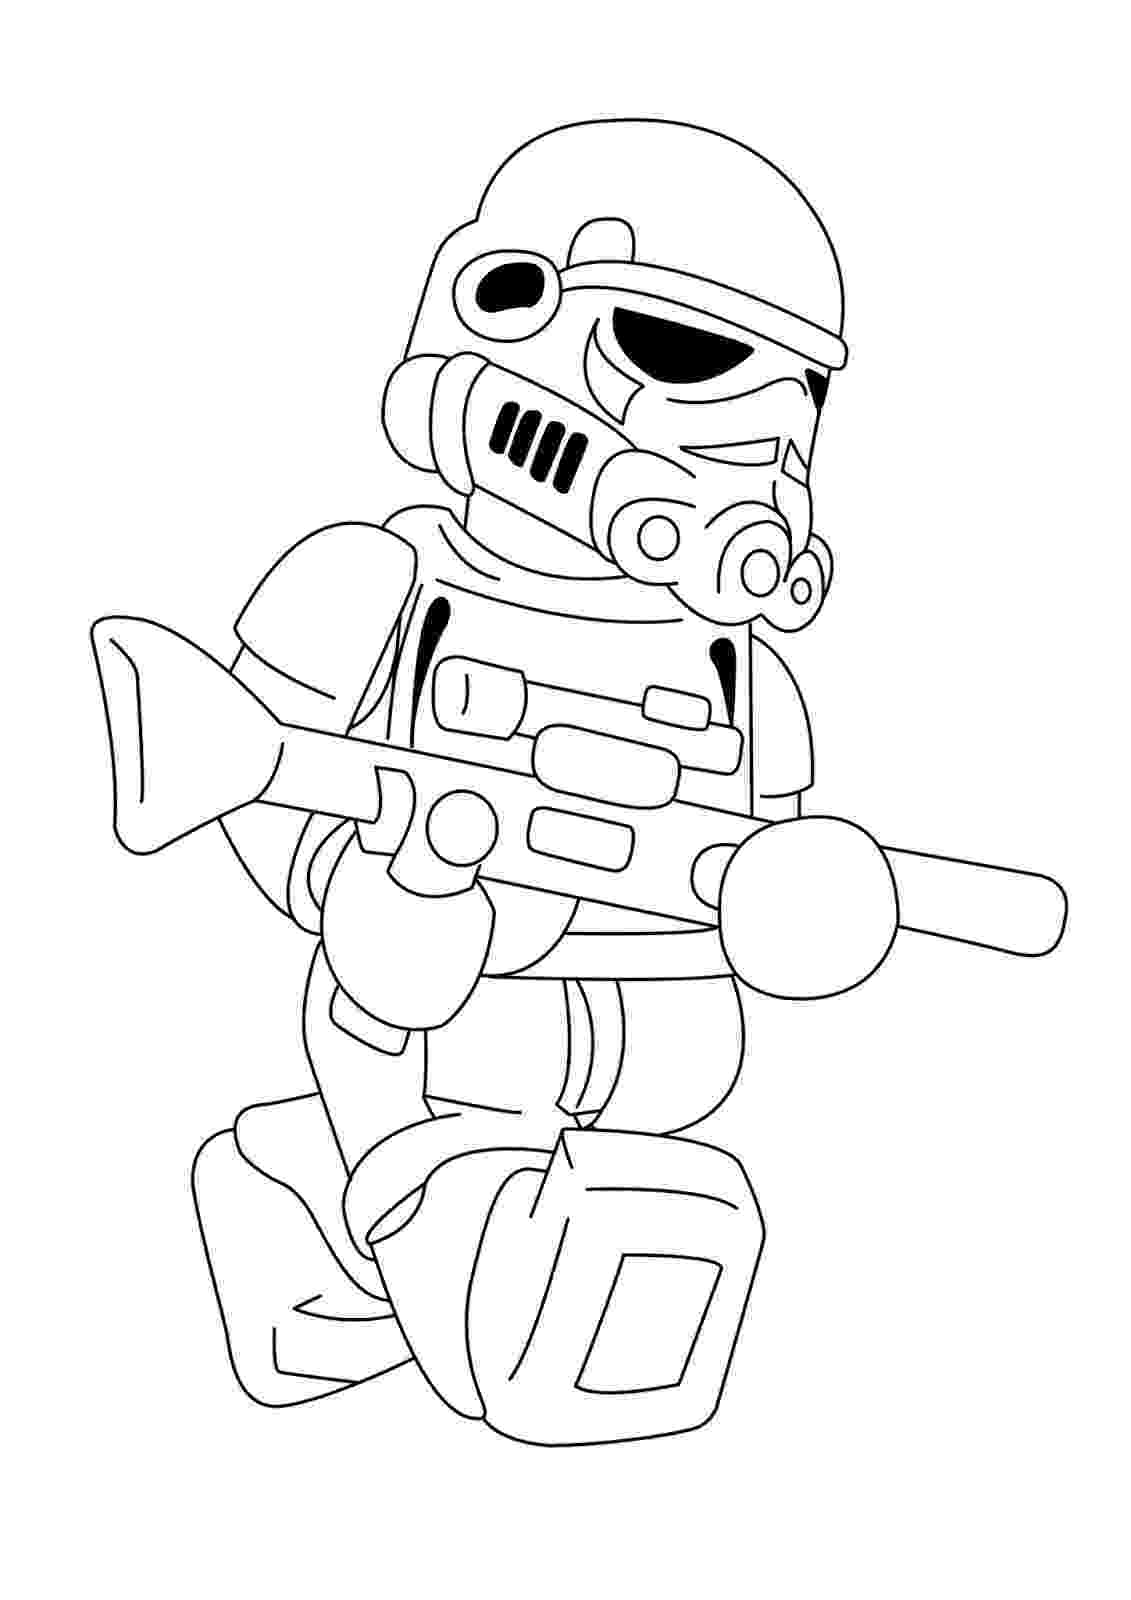 lego starwars coloring pages star wars coloring pages 2018 dr odd lego pages coloring starwars 